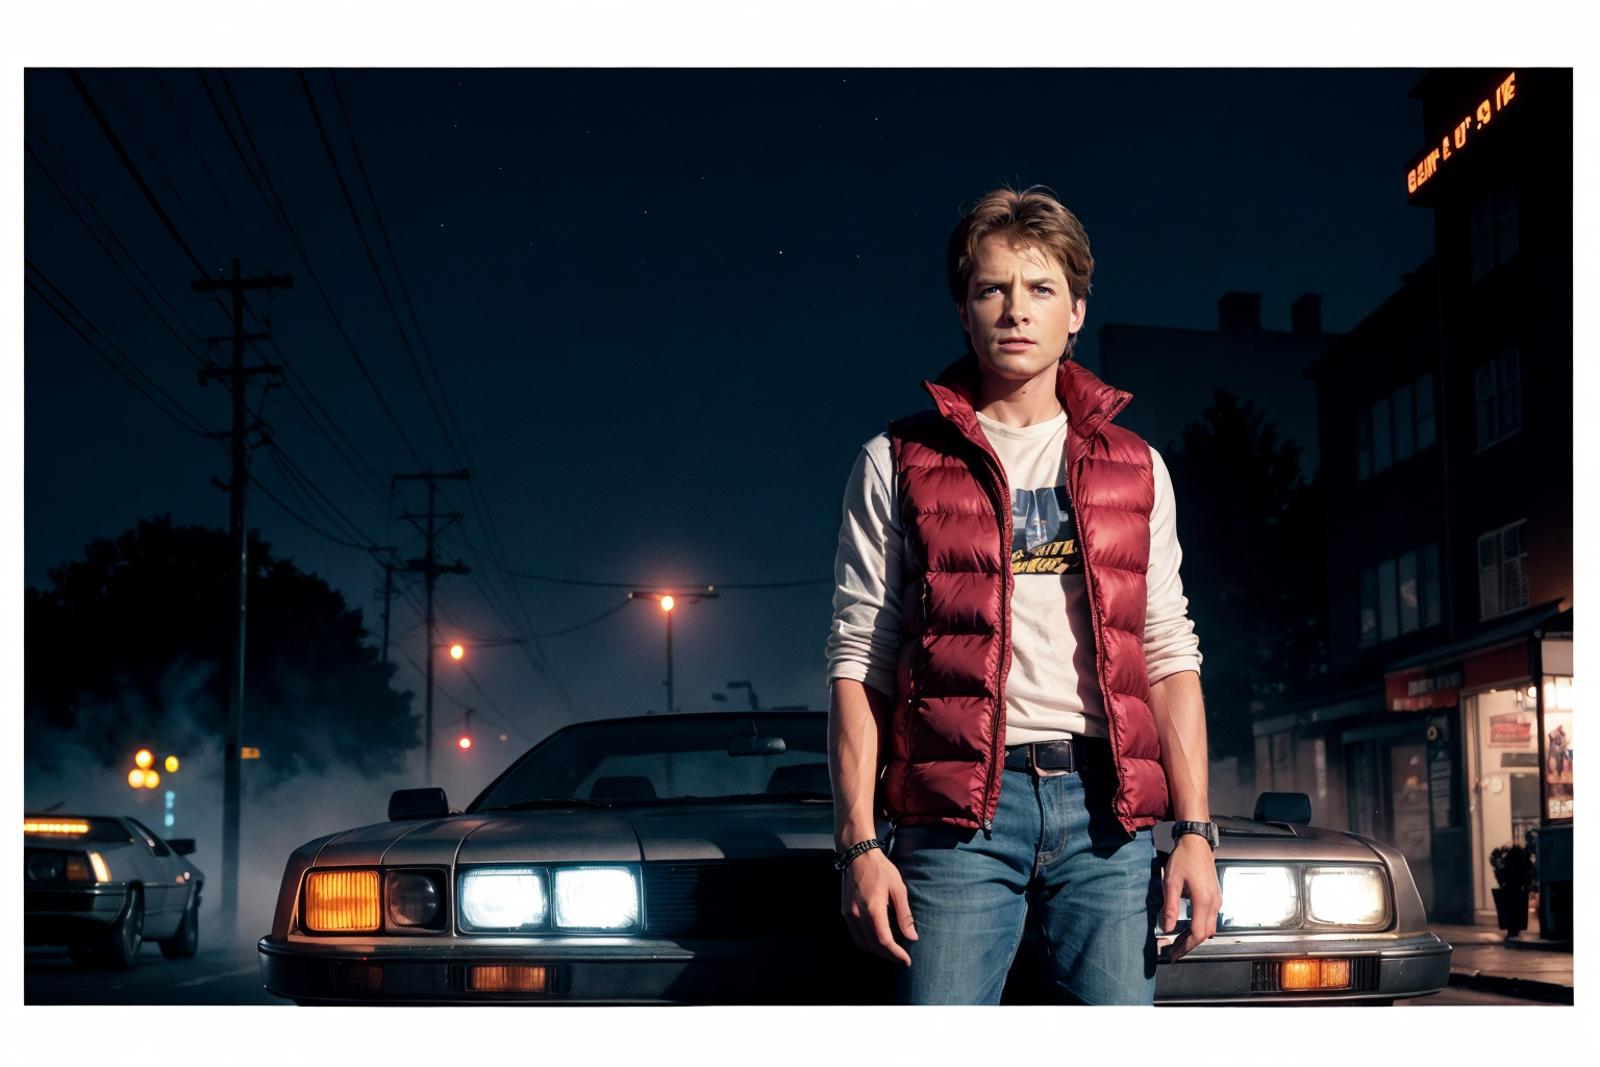 Marty McFly NEW image by vitim79